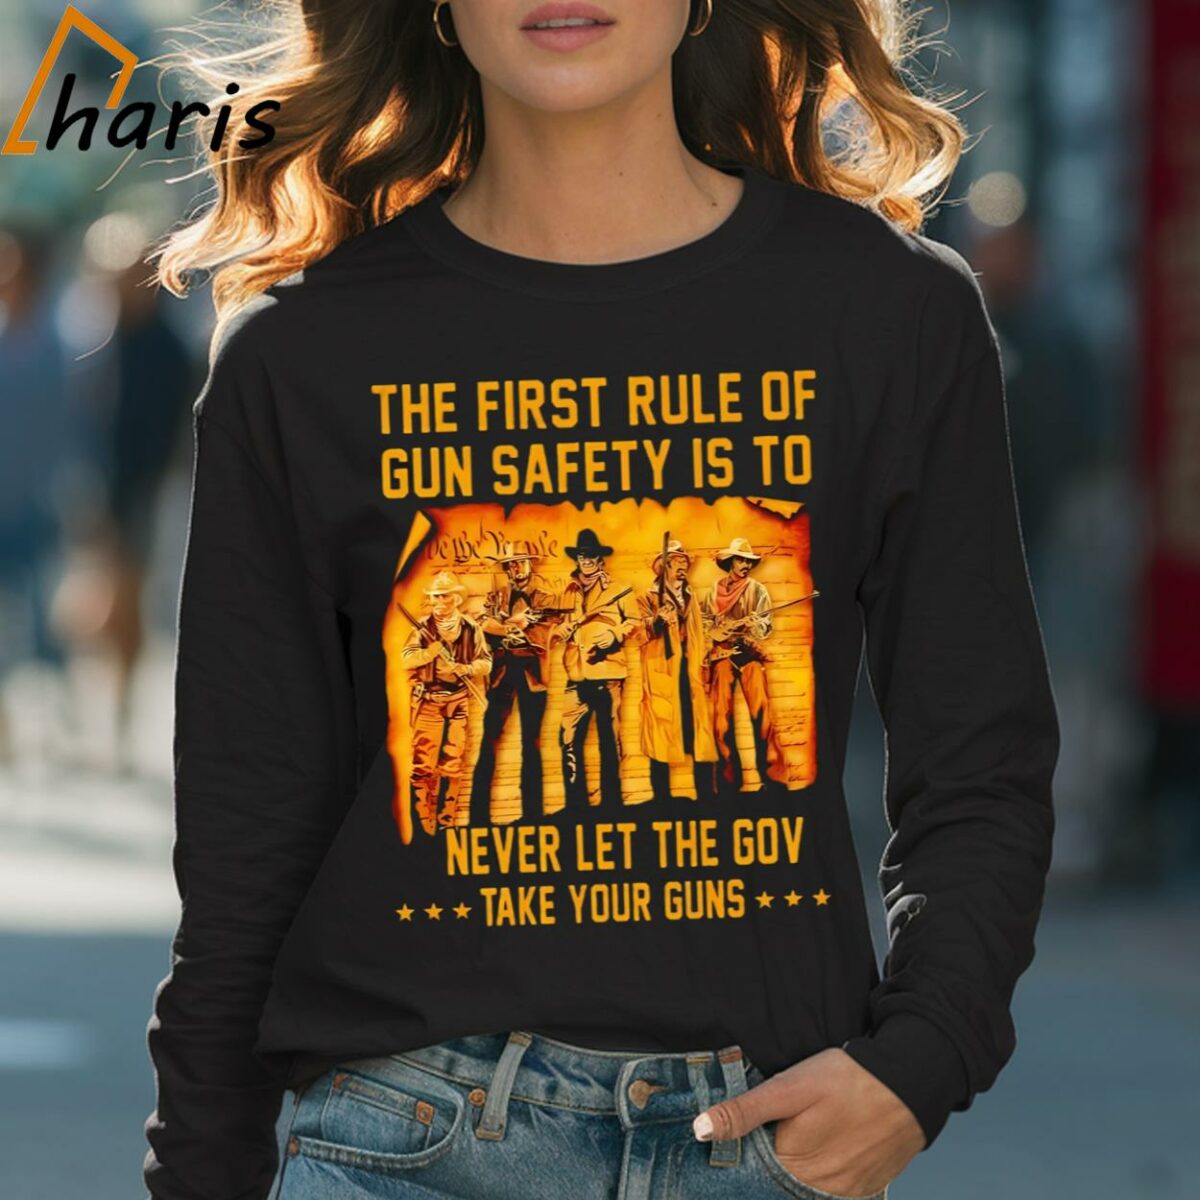 The First Rule Of Gun Safety Is To Never Let The Government Take Your Guns Shirt 4 Long sleeve shirt